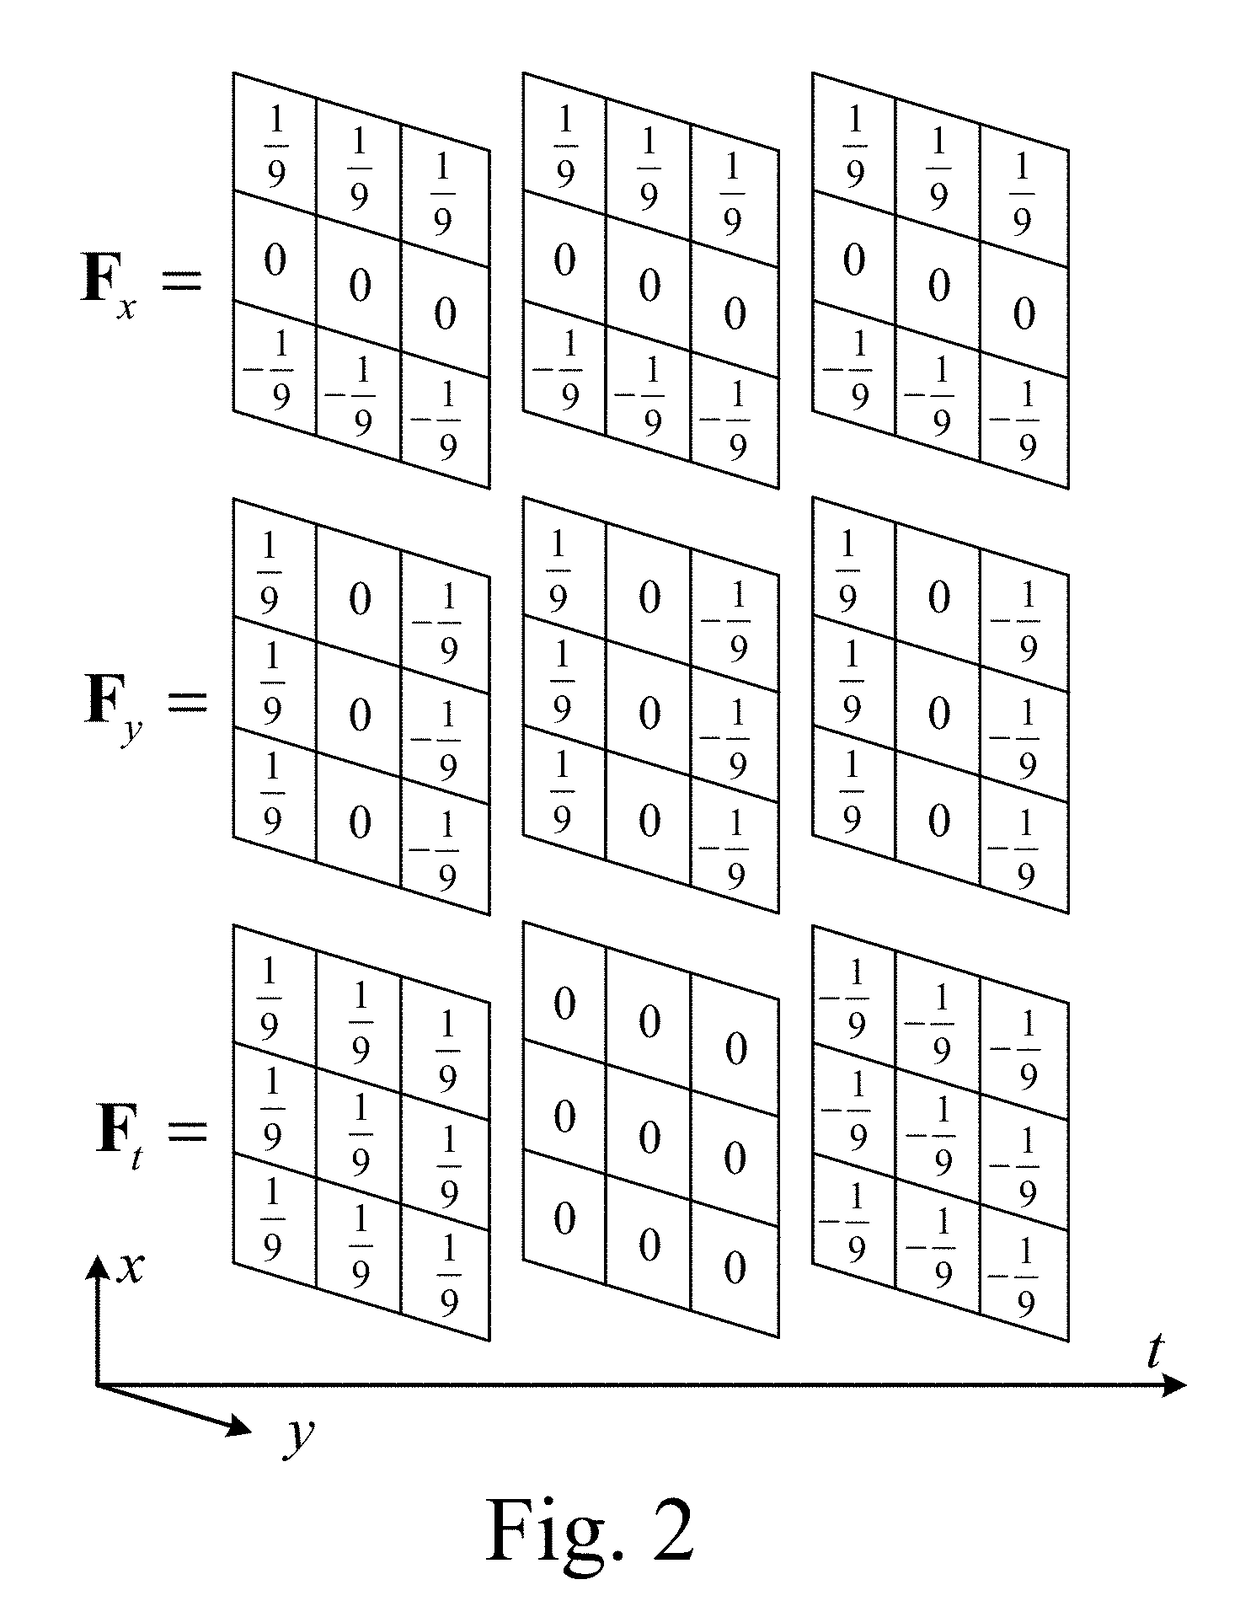 Video quality objective assessment method based on spatiotemporal domain structure